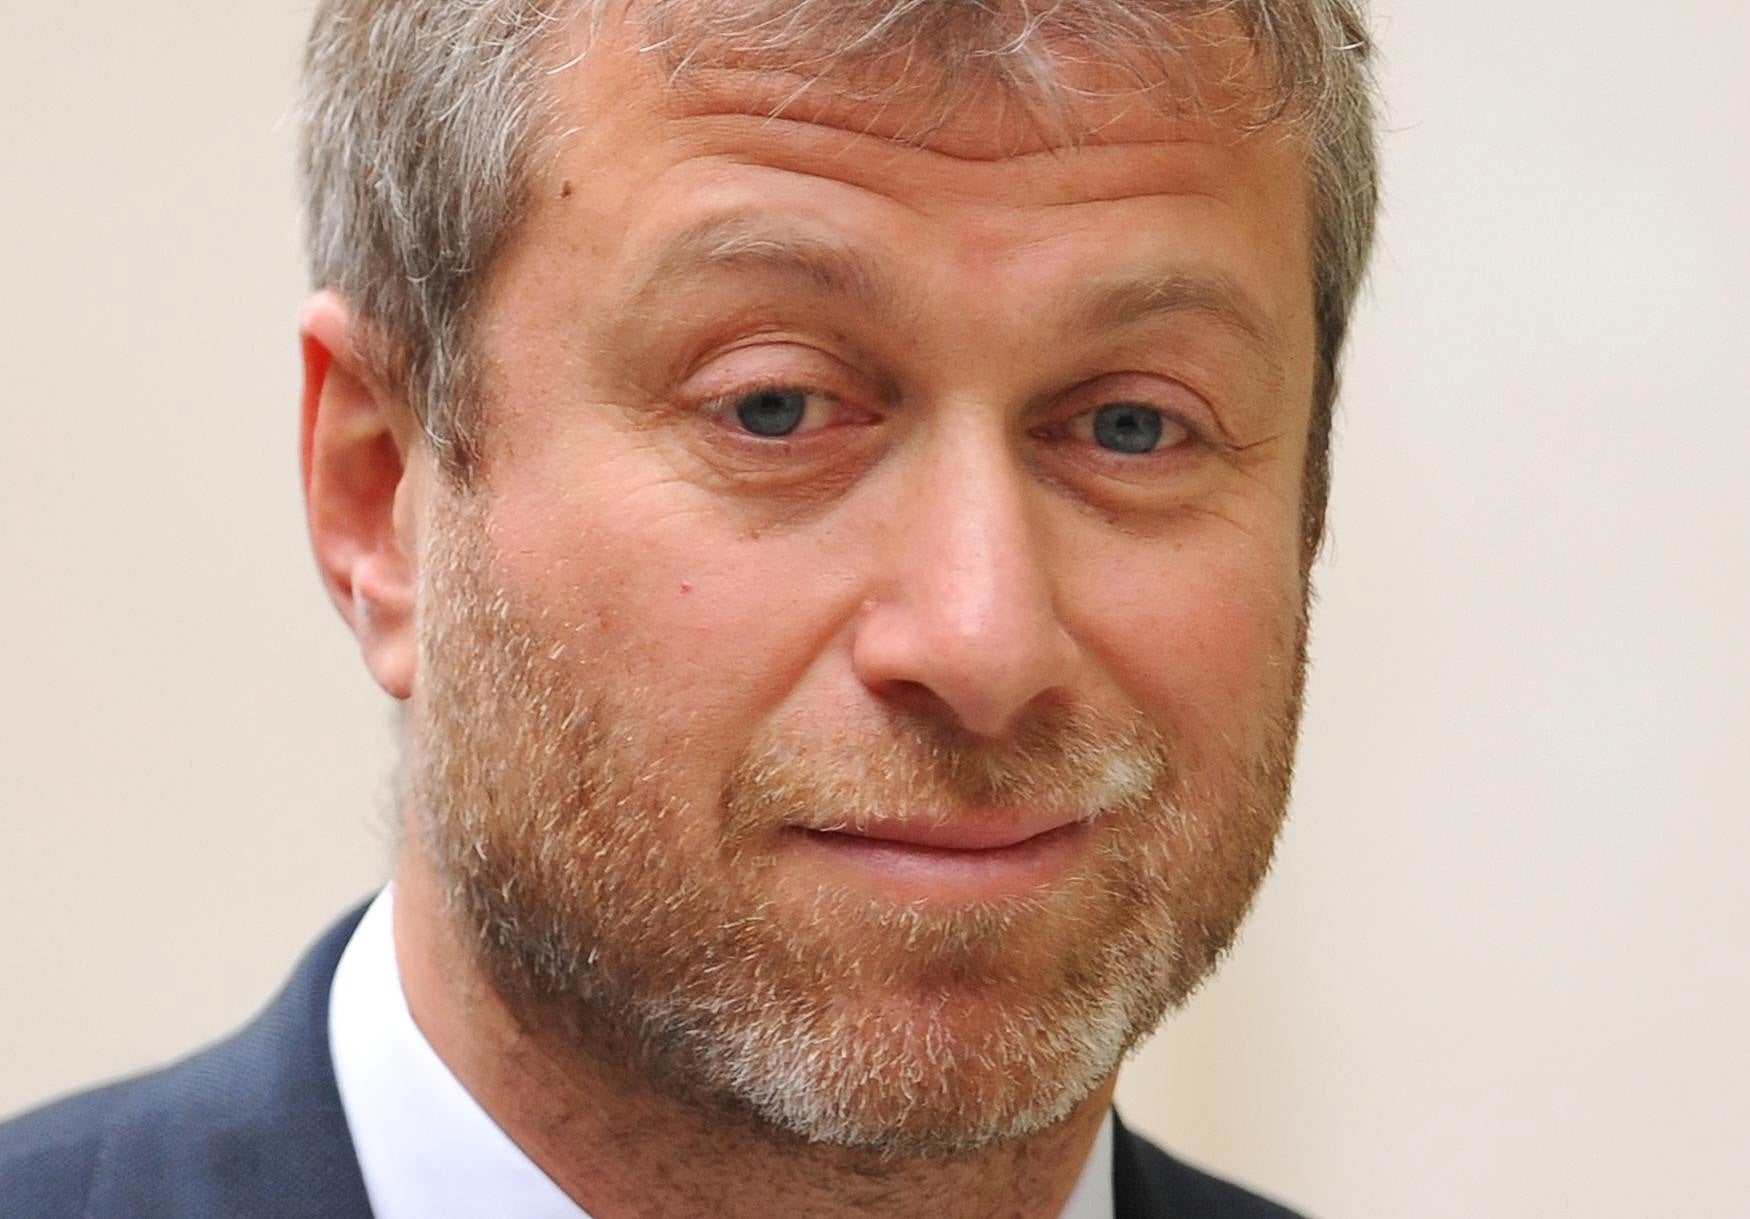 Roman Abramovich, pictured, will sell Chelsea after 19 years owning the Stamford Bridge club (Dominic Lipinski/PA)